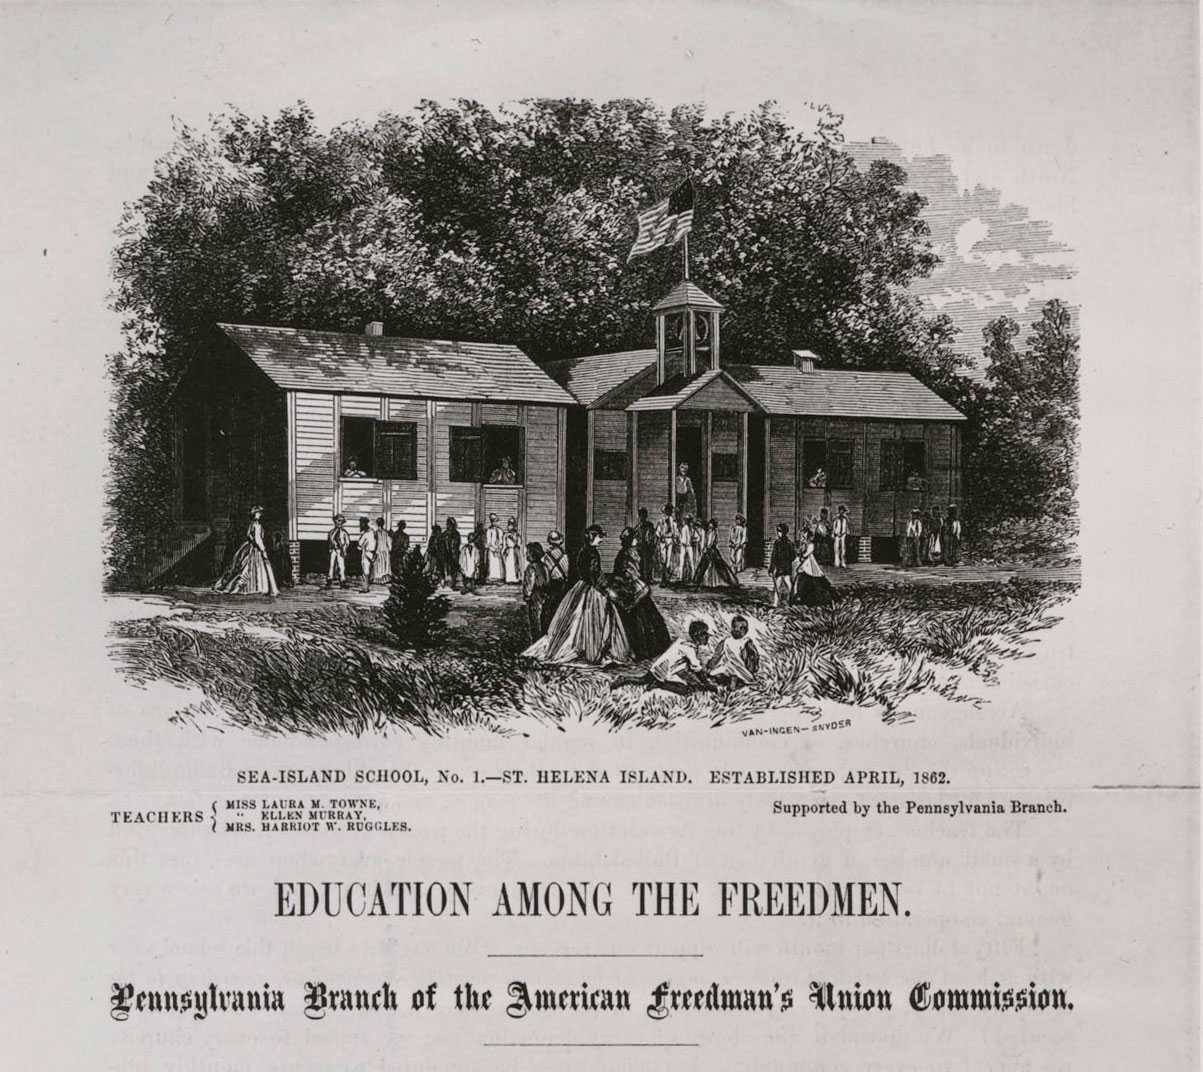 St. Helena School engraving has an illustration of the school above an article that is titled "Education among the Freedmen"